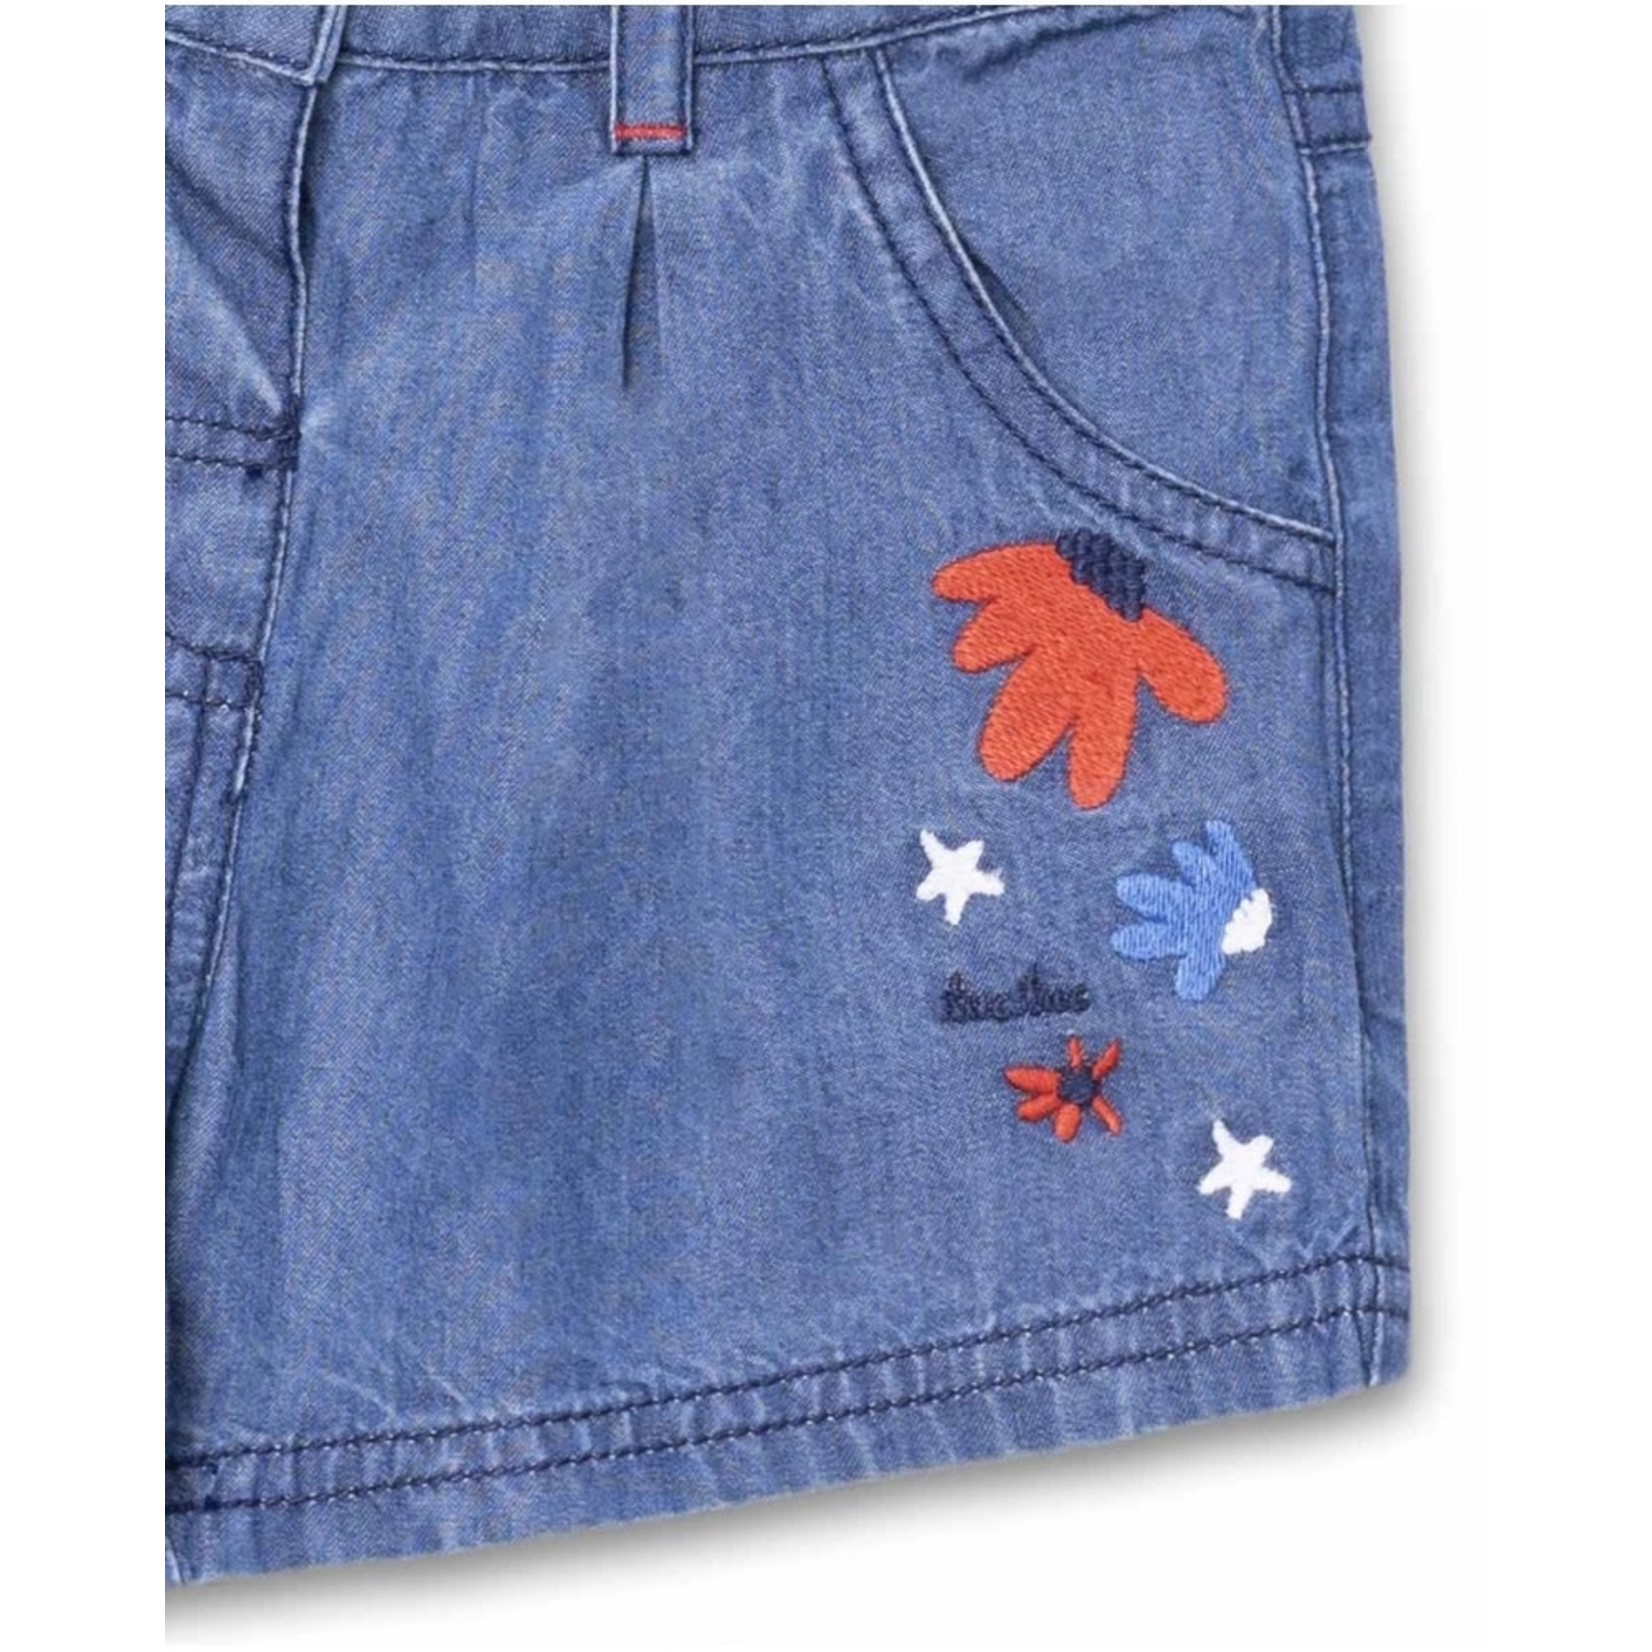 TucTuc TUC TUC - Lightweight Denim Shorts with Pockets and Flower Embroidery 'Beach Day'